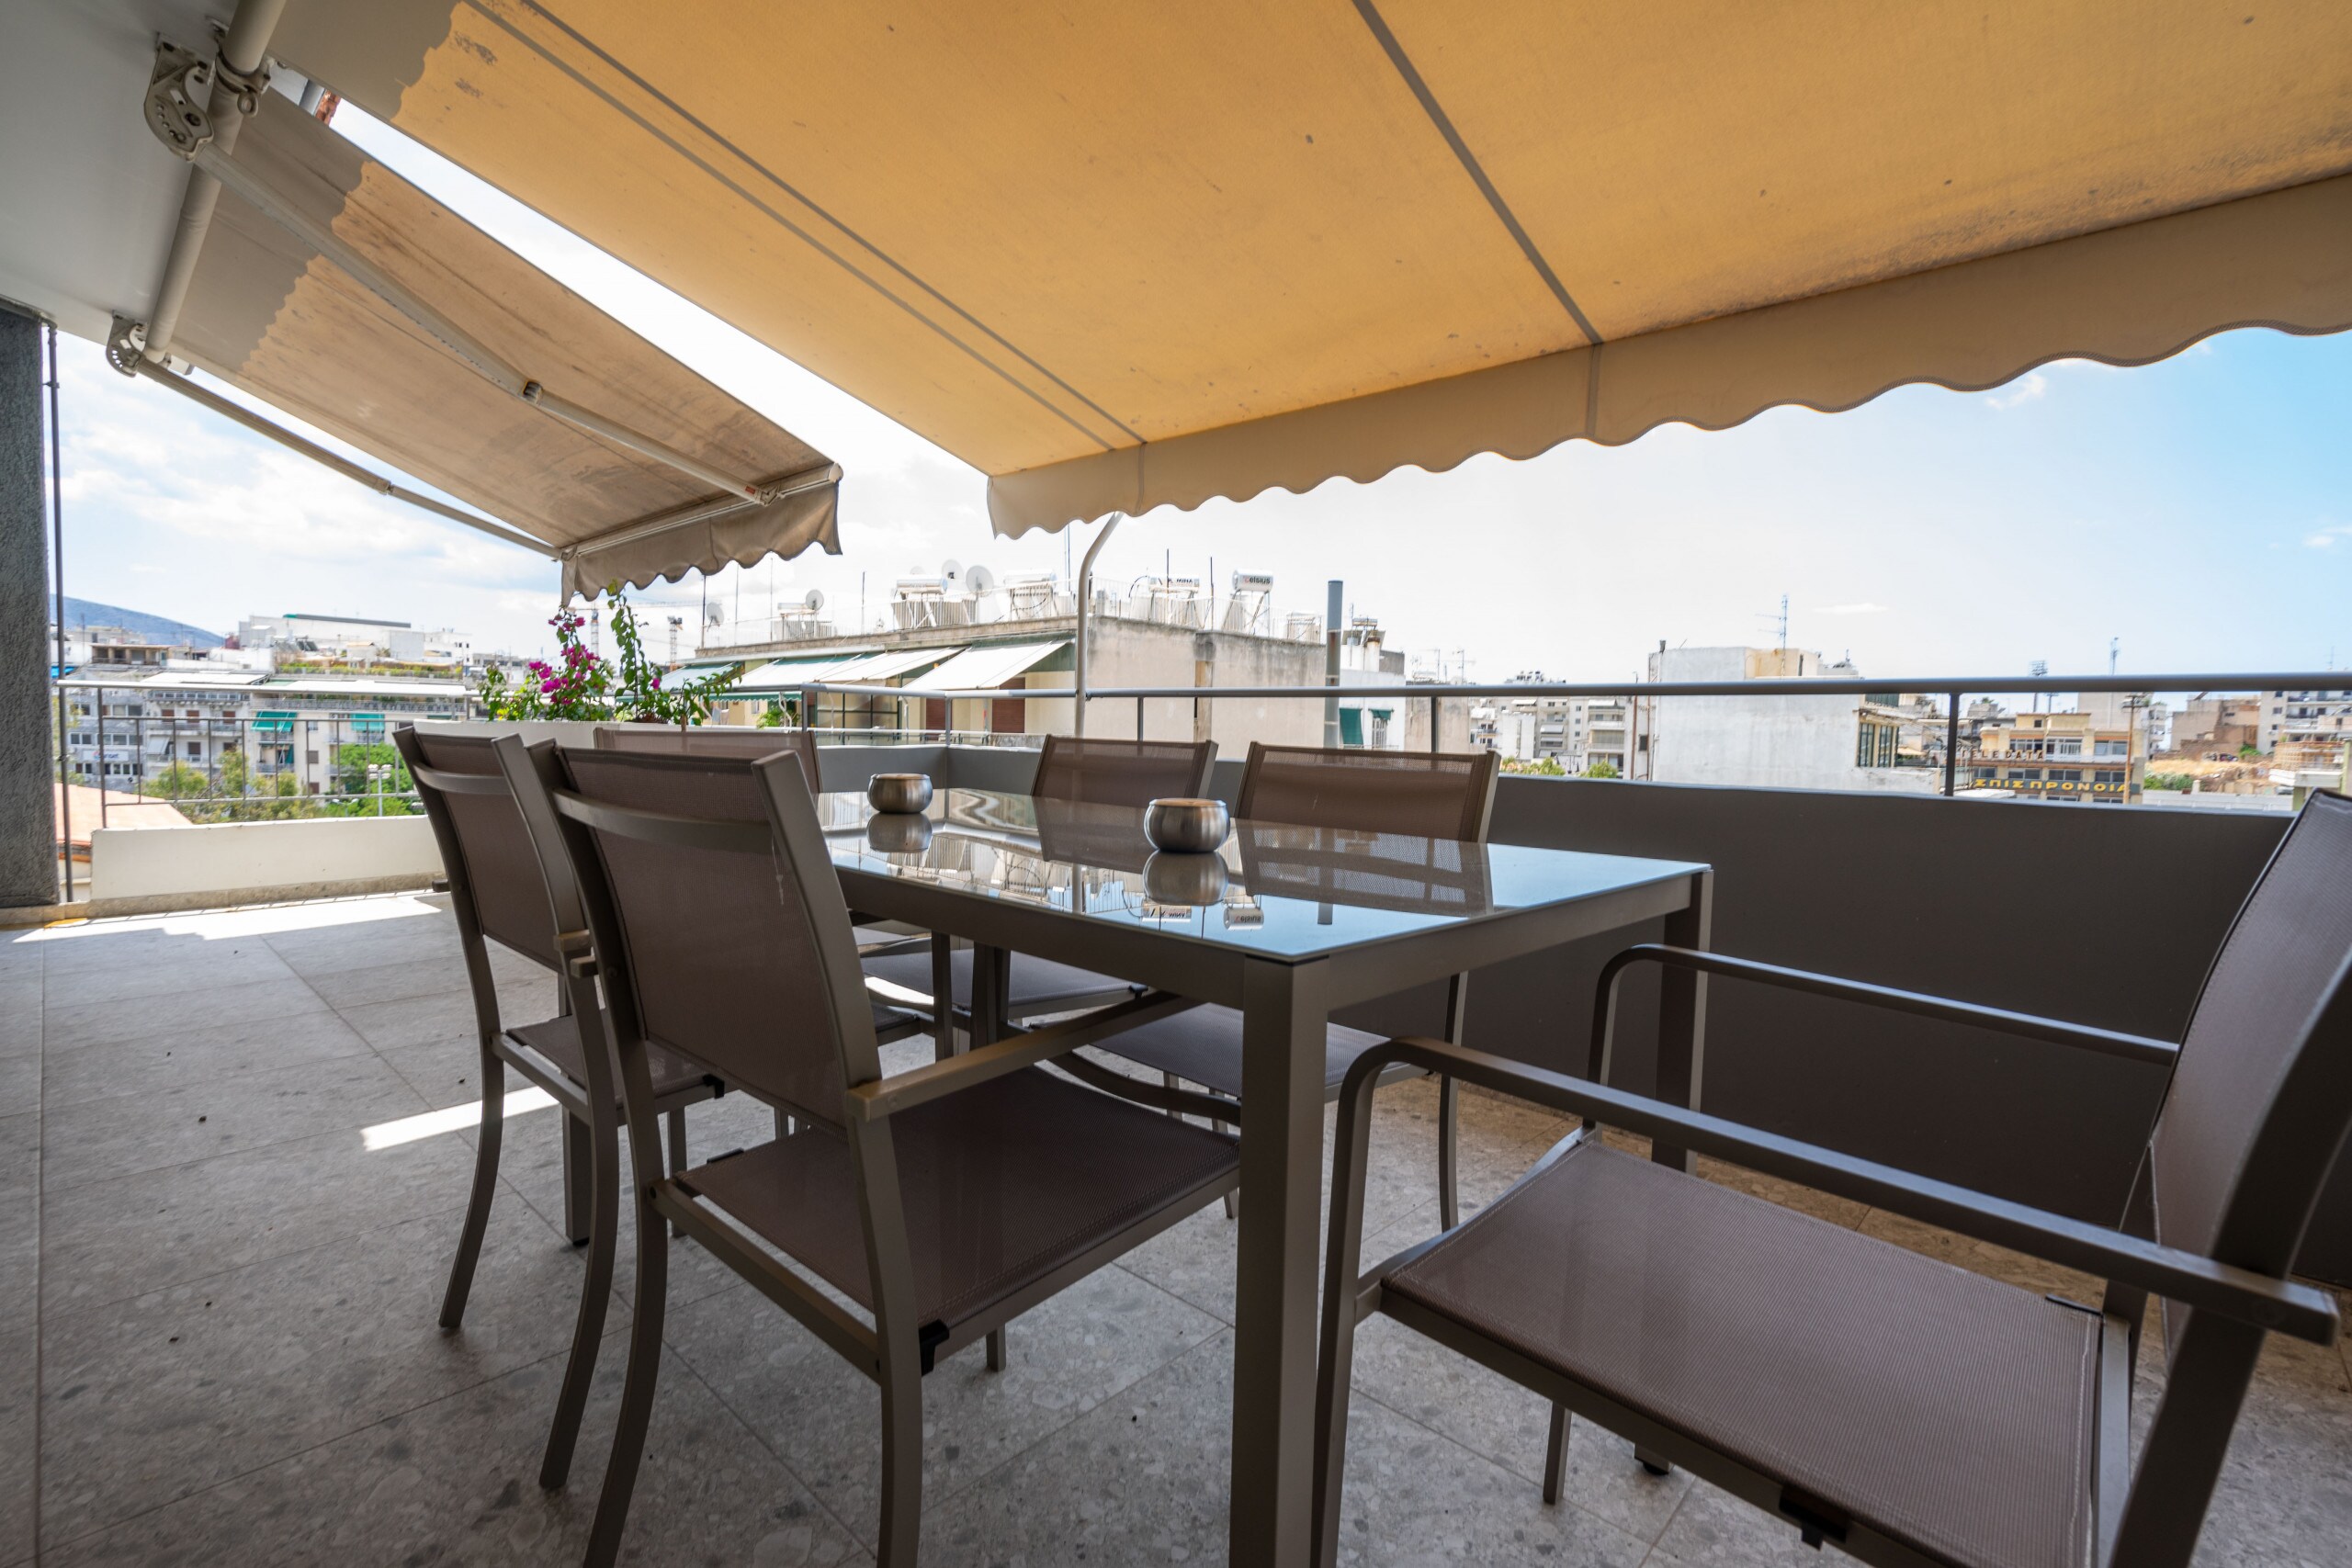 There is a big terrace to savour drinks and meals al fresco, while enjoying the city views and the light breeze.